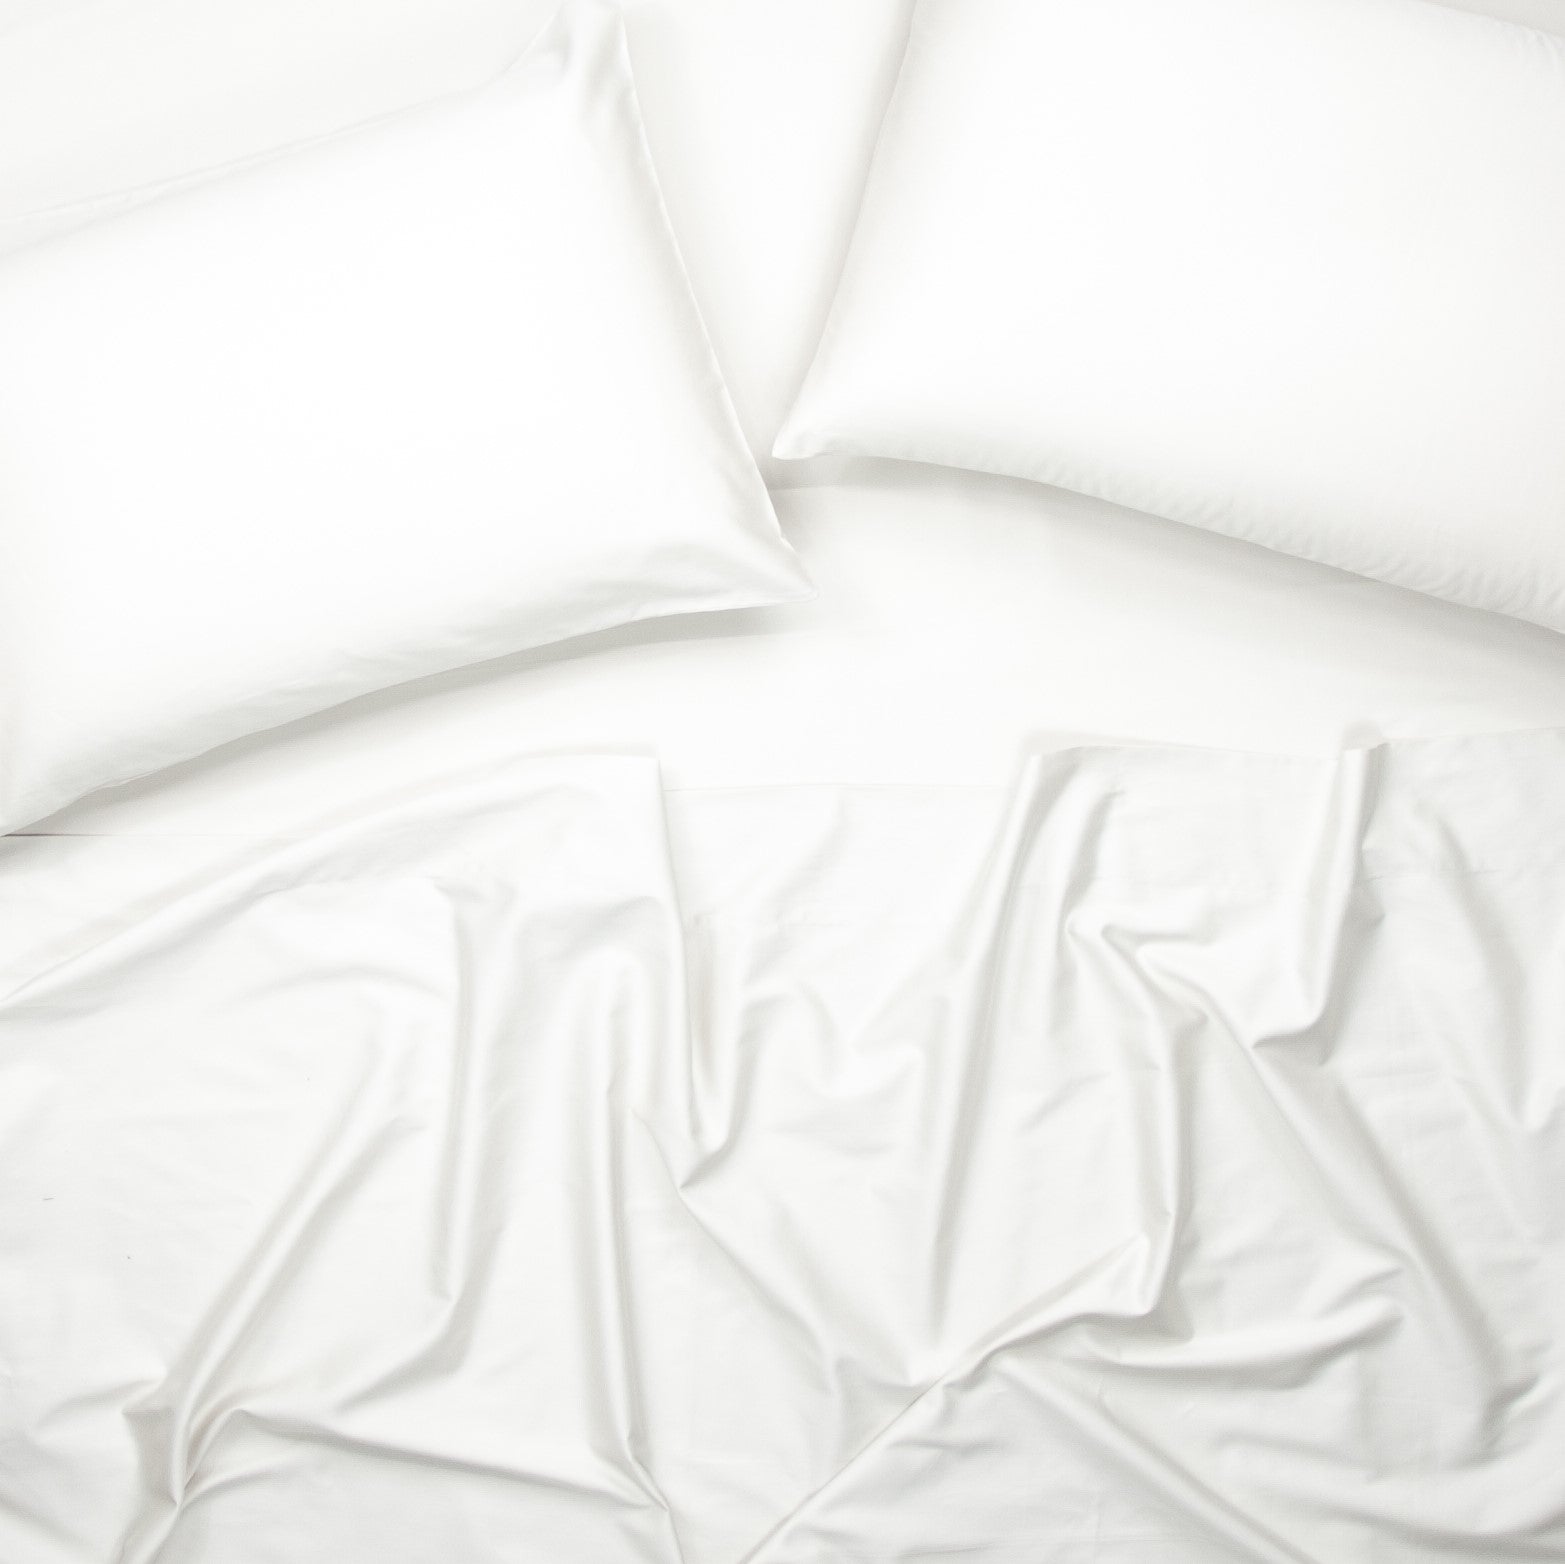 Birds eye view of organic cotton bed sheets with pillowcases in pure white